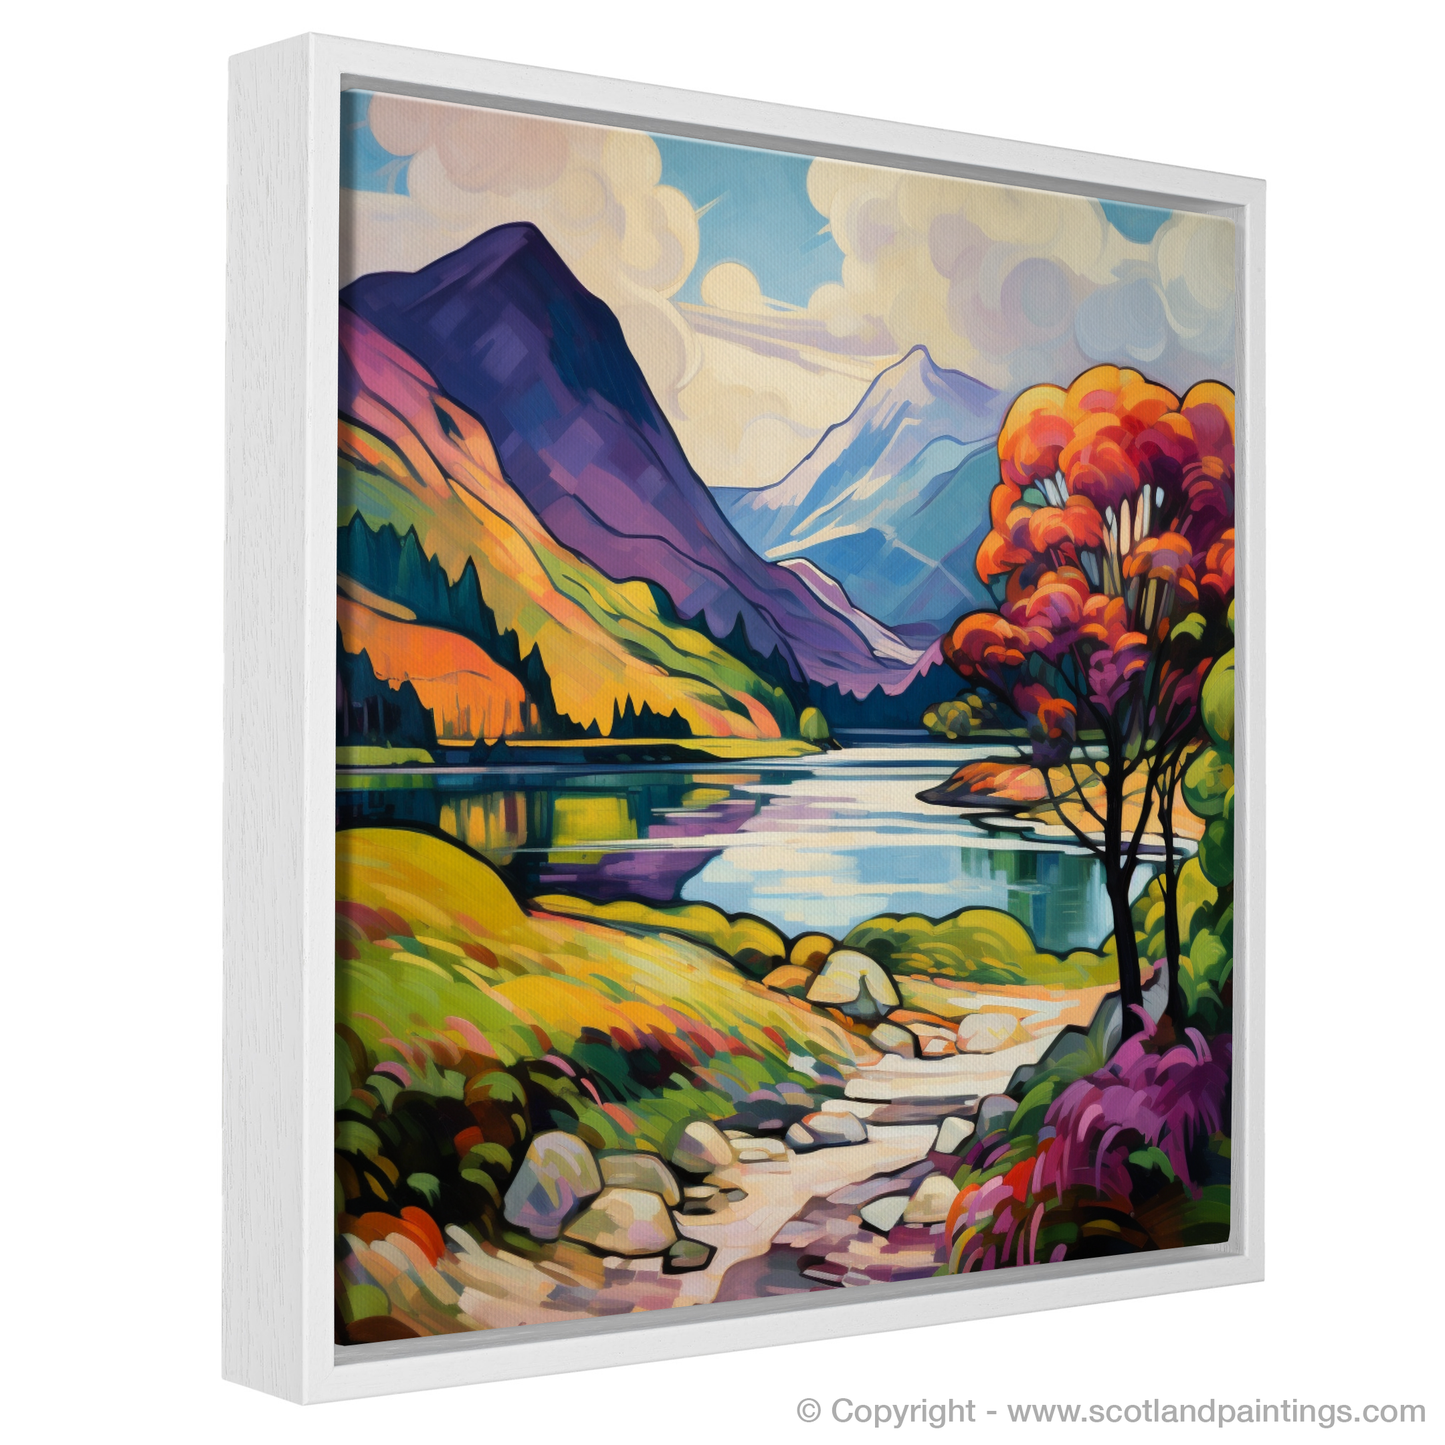 Painting and Art Print of Glenfinnan, Highlands in summer entitled "Highland Radiance: A Fauvist Ode to Glenfinnan Summer".